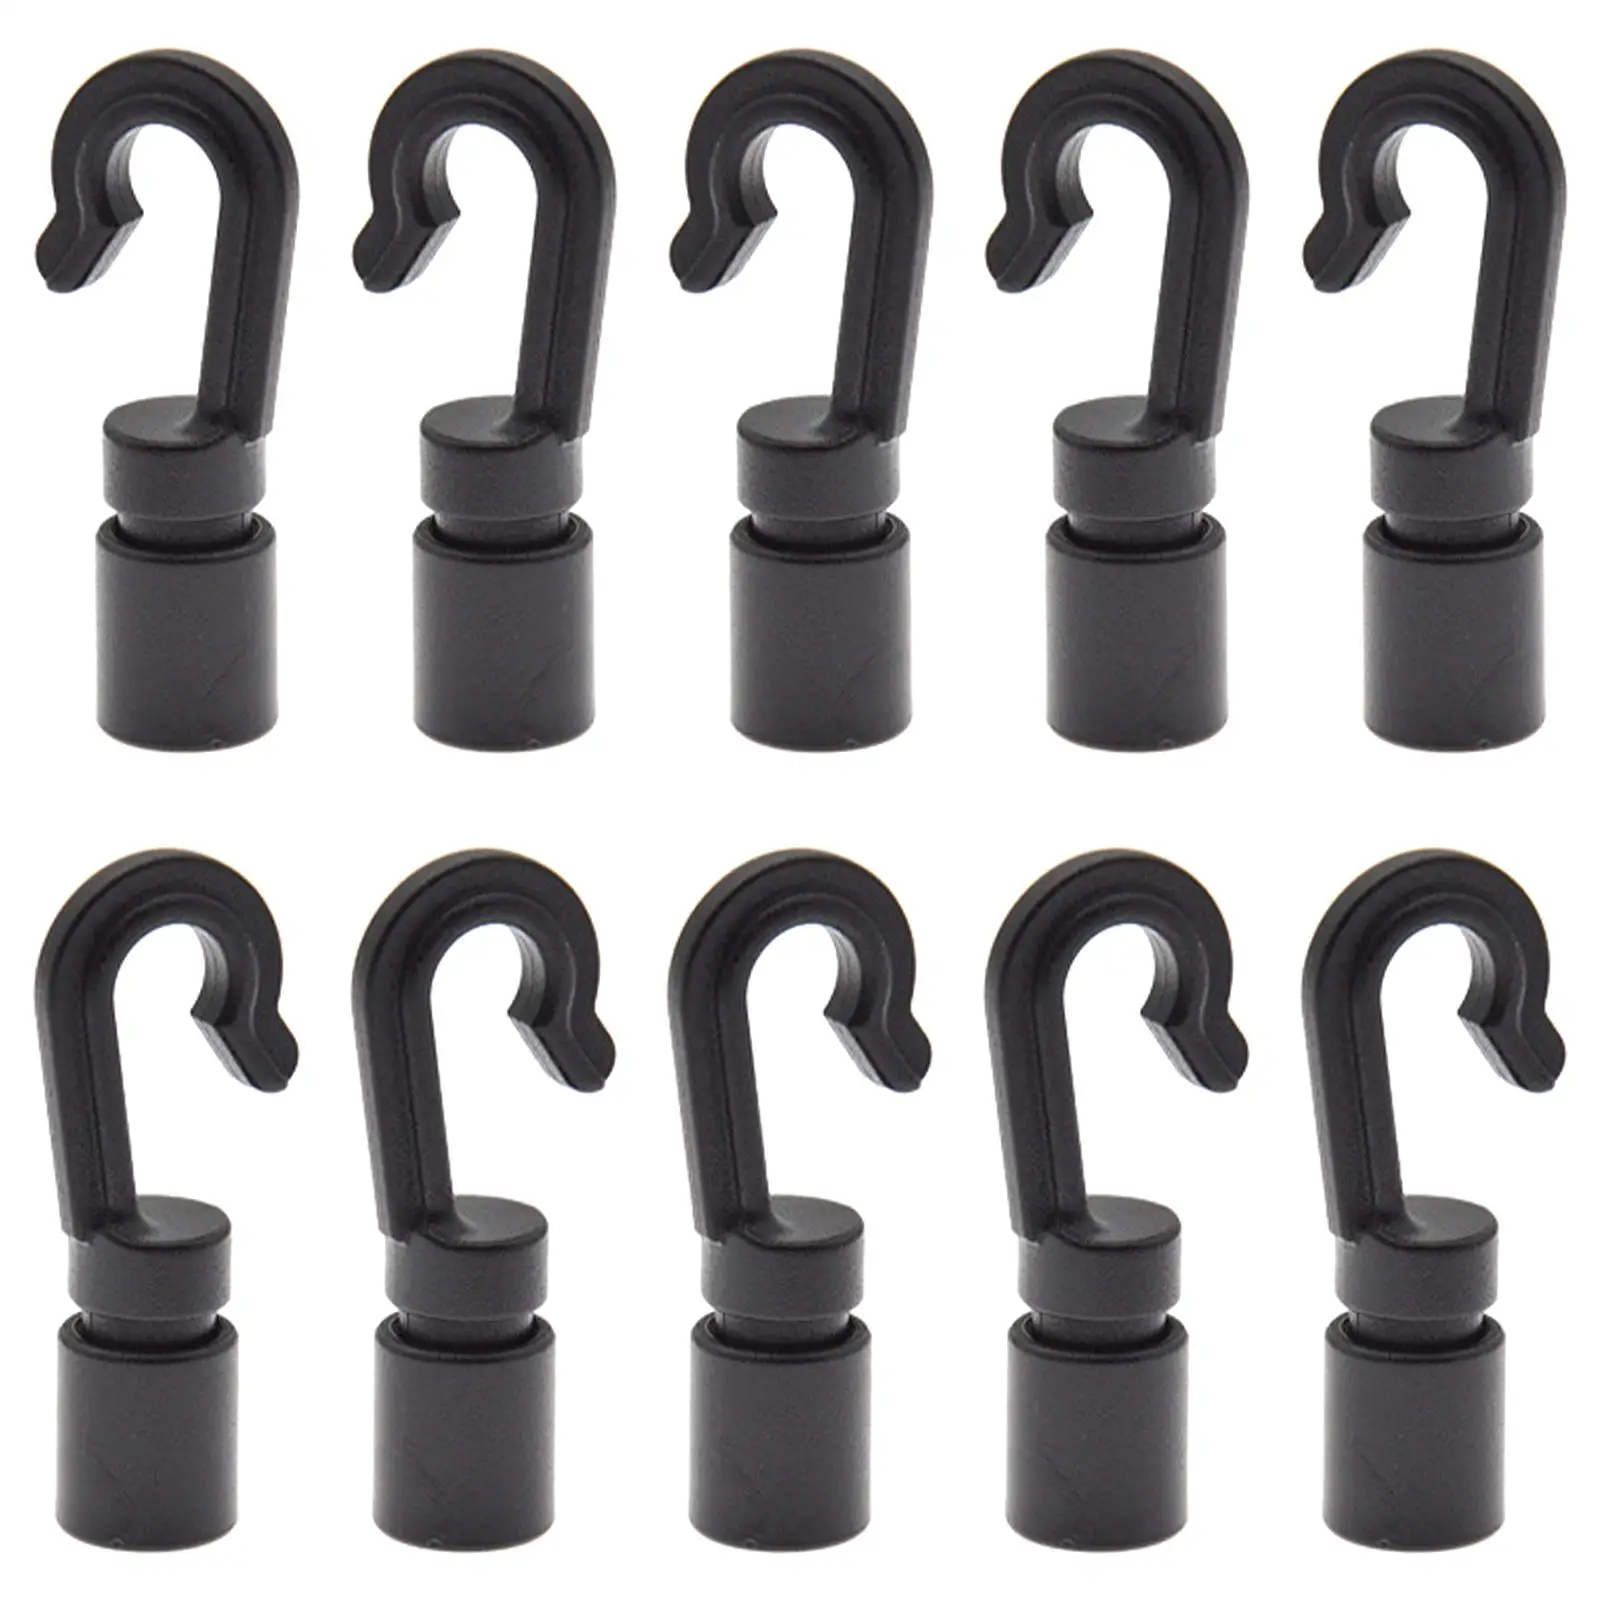 10 Cord Hooks Rope Terminal Ends Plastic for Resistance Bands Kayaks